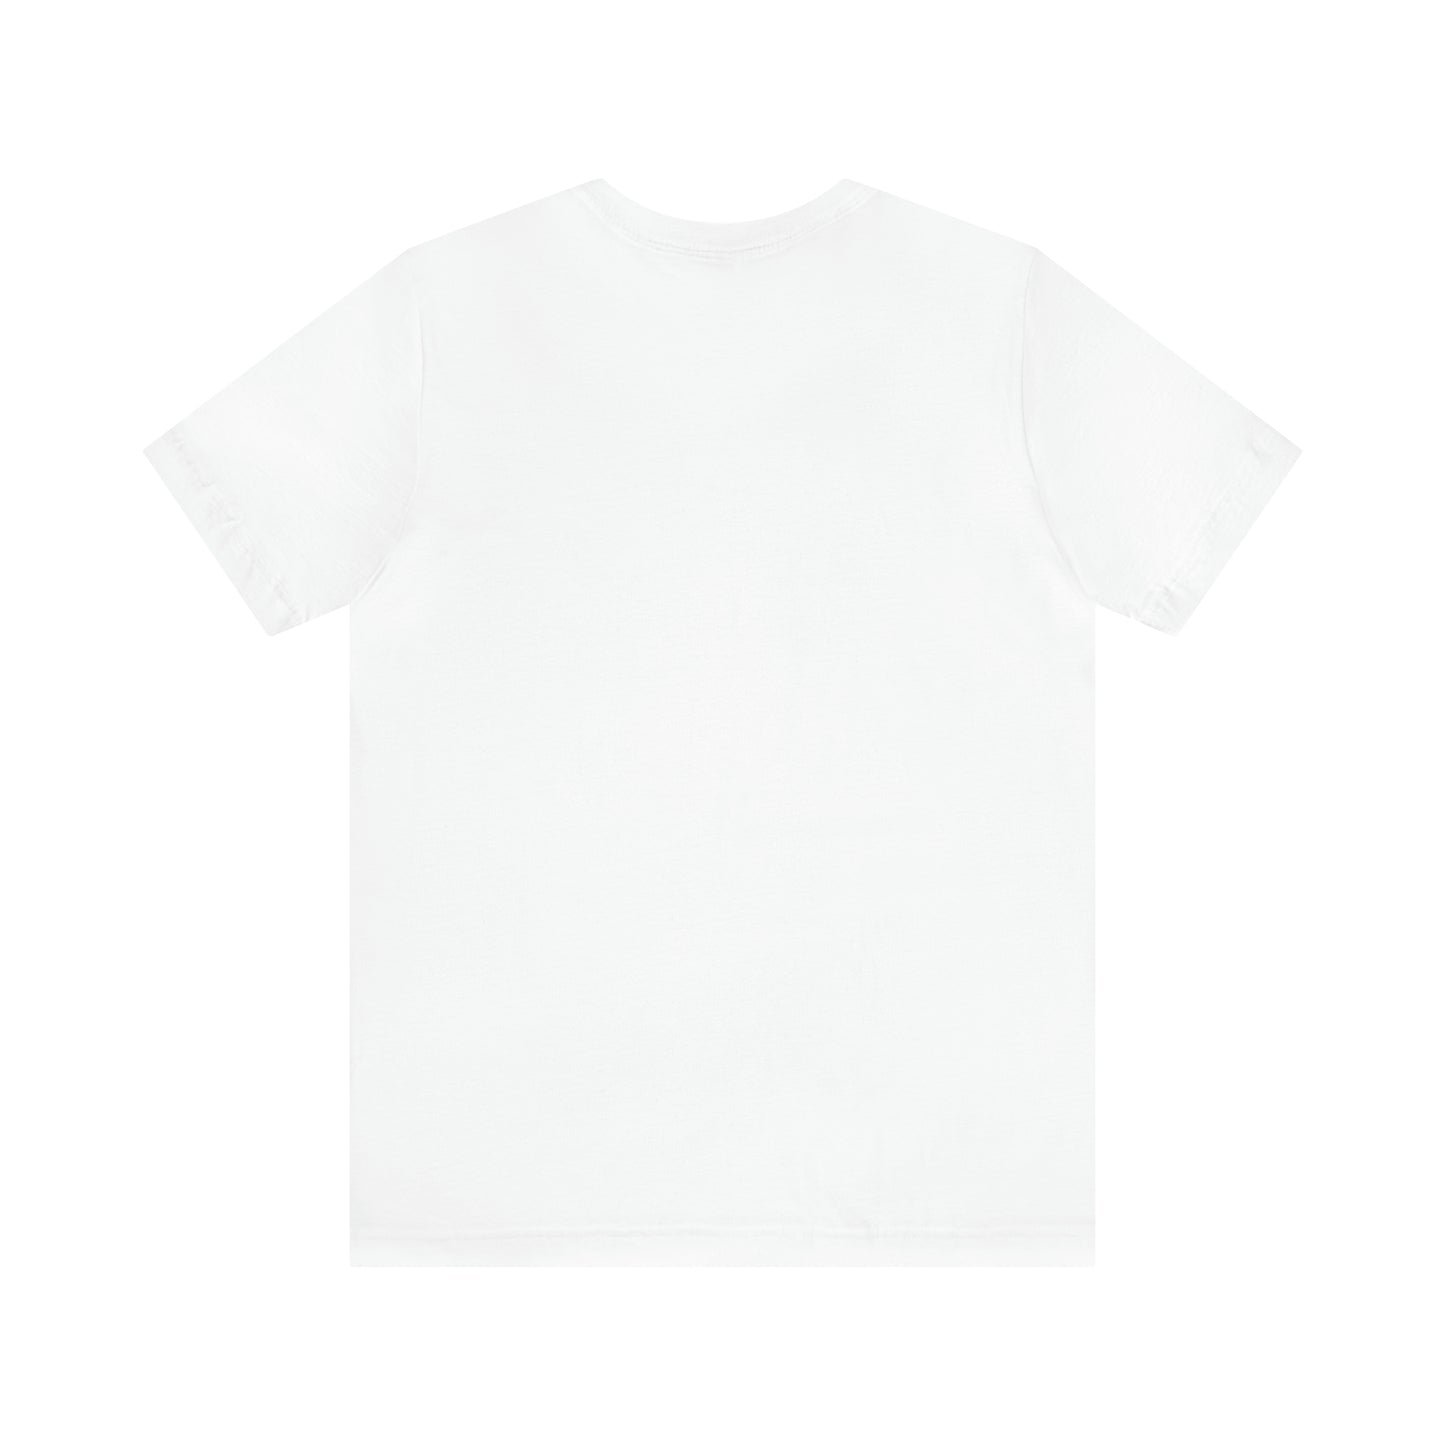 Jumping Tot (White Outfit) - Unisex Jersey Short Sleeve Tee